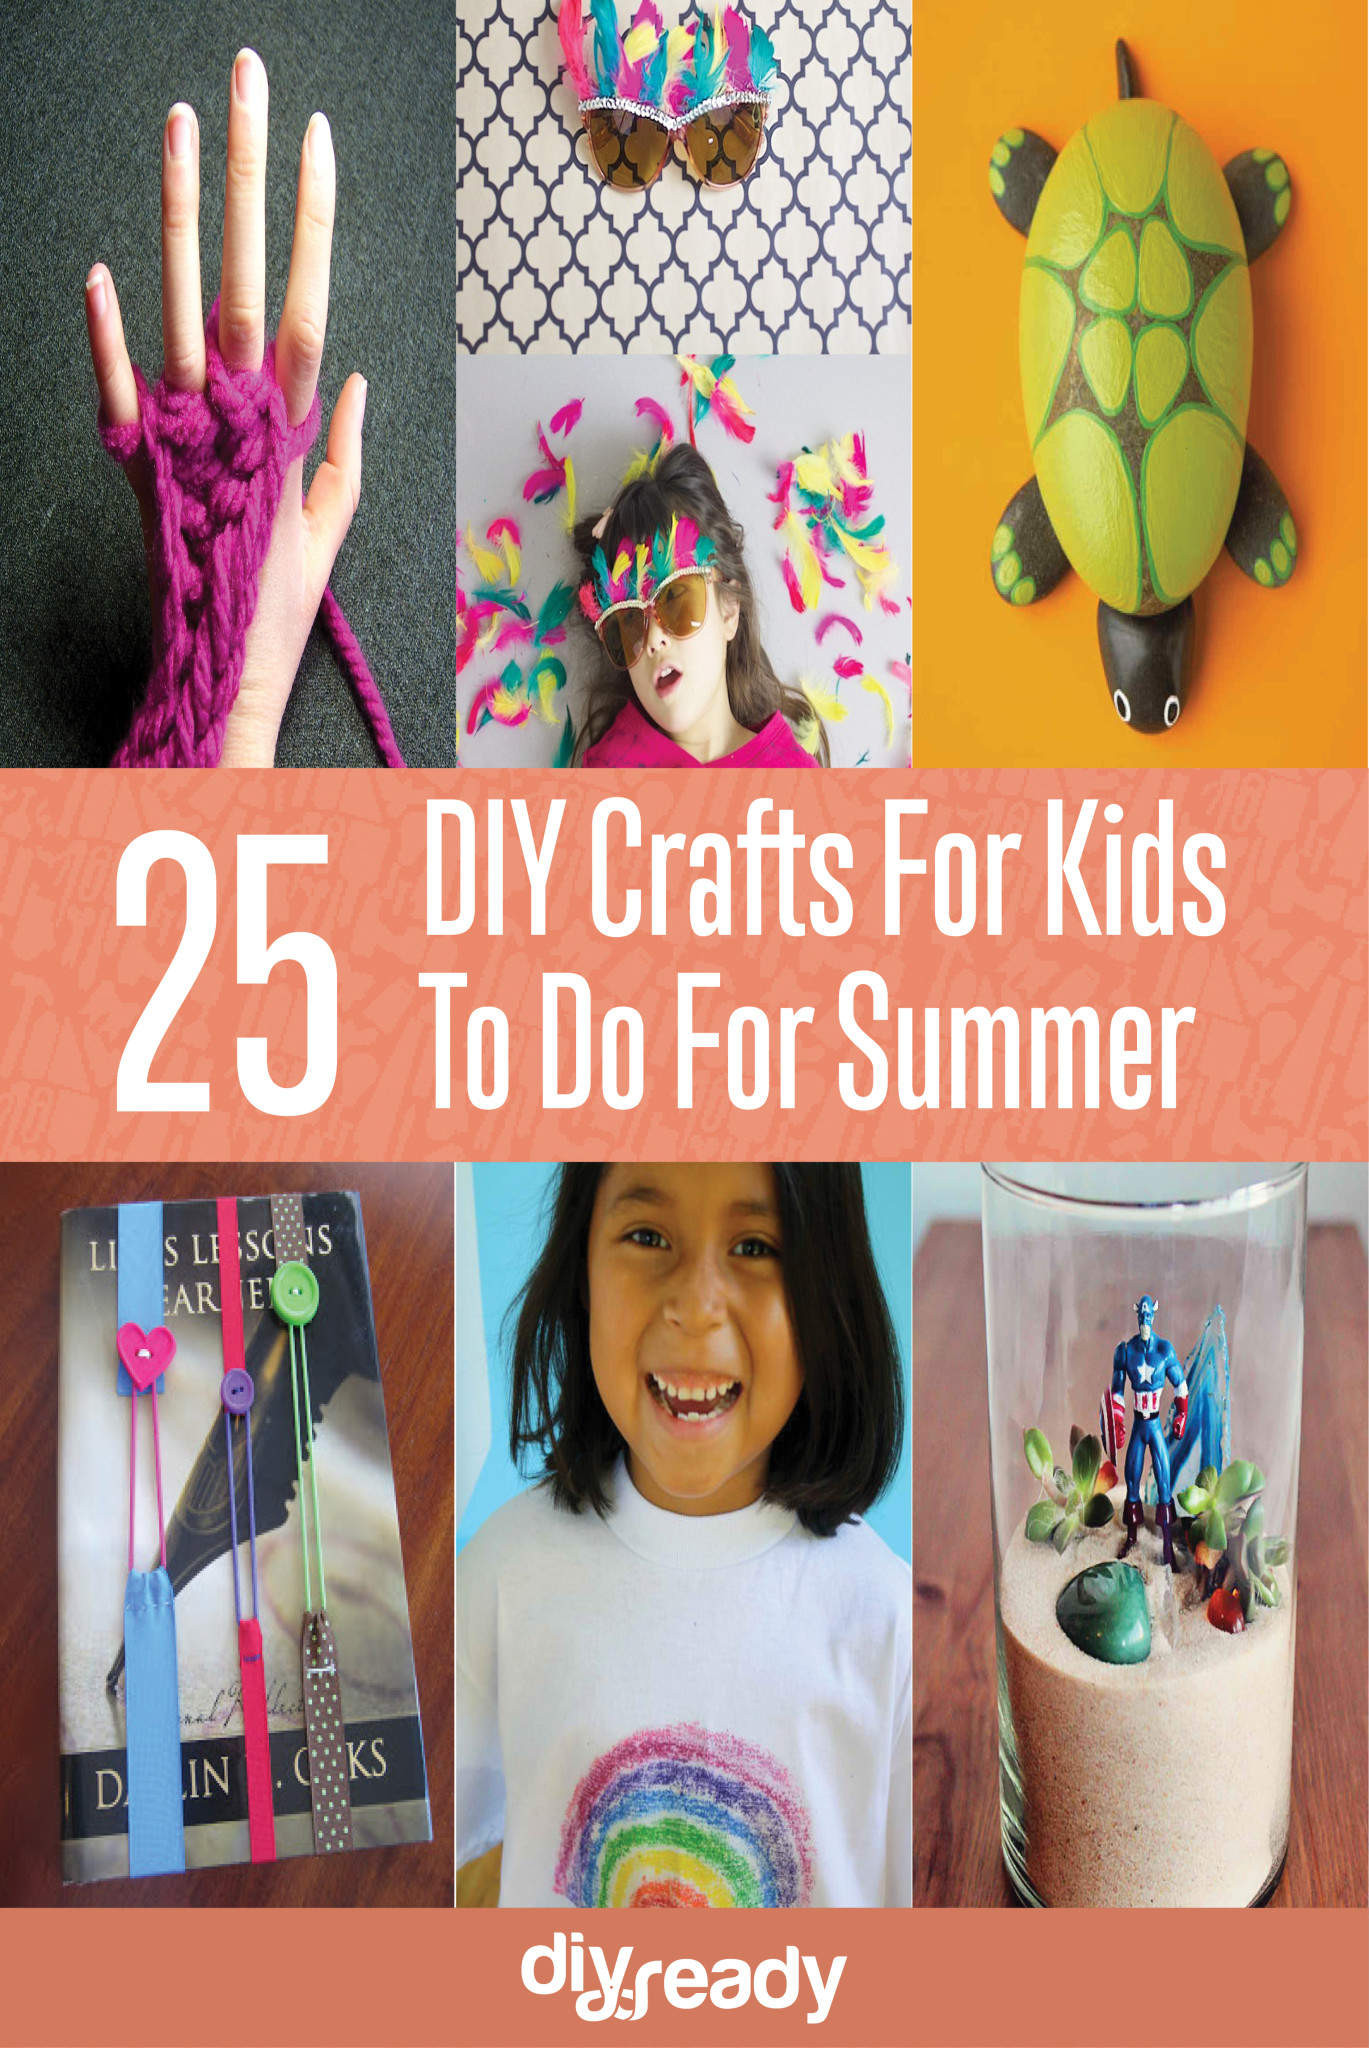 DIY Projects For Toddlers
 DIY Crafts for Kids To Do For Summer